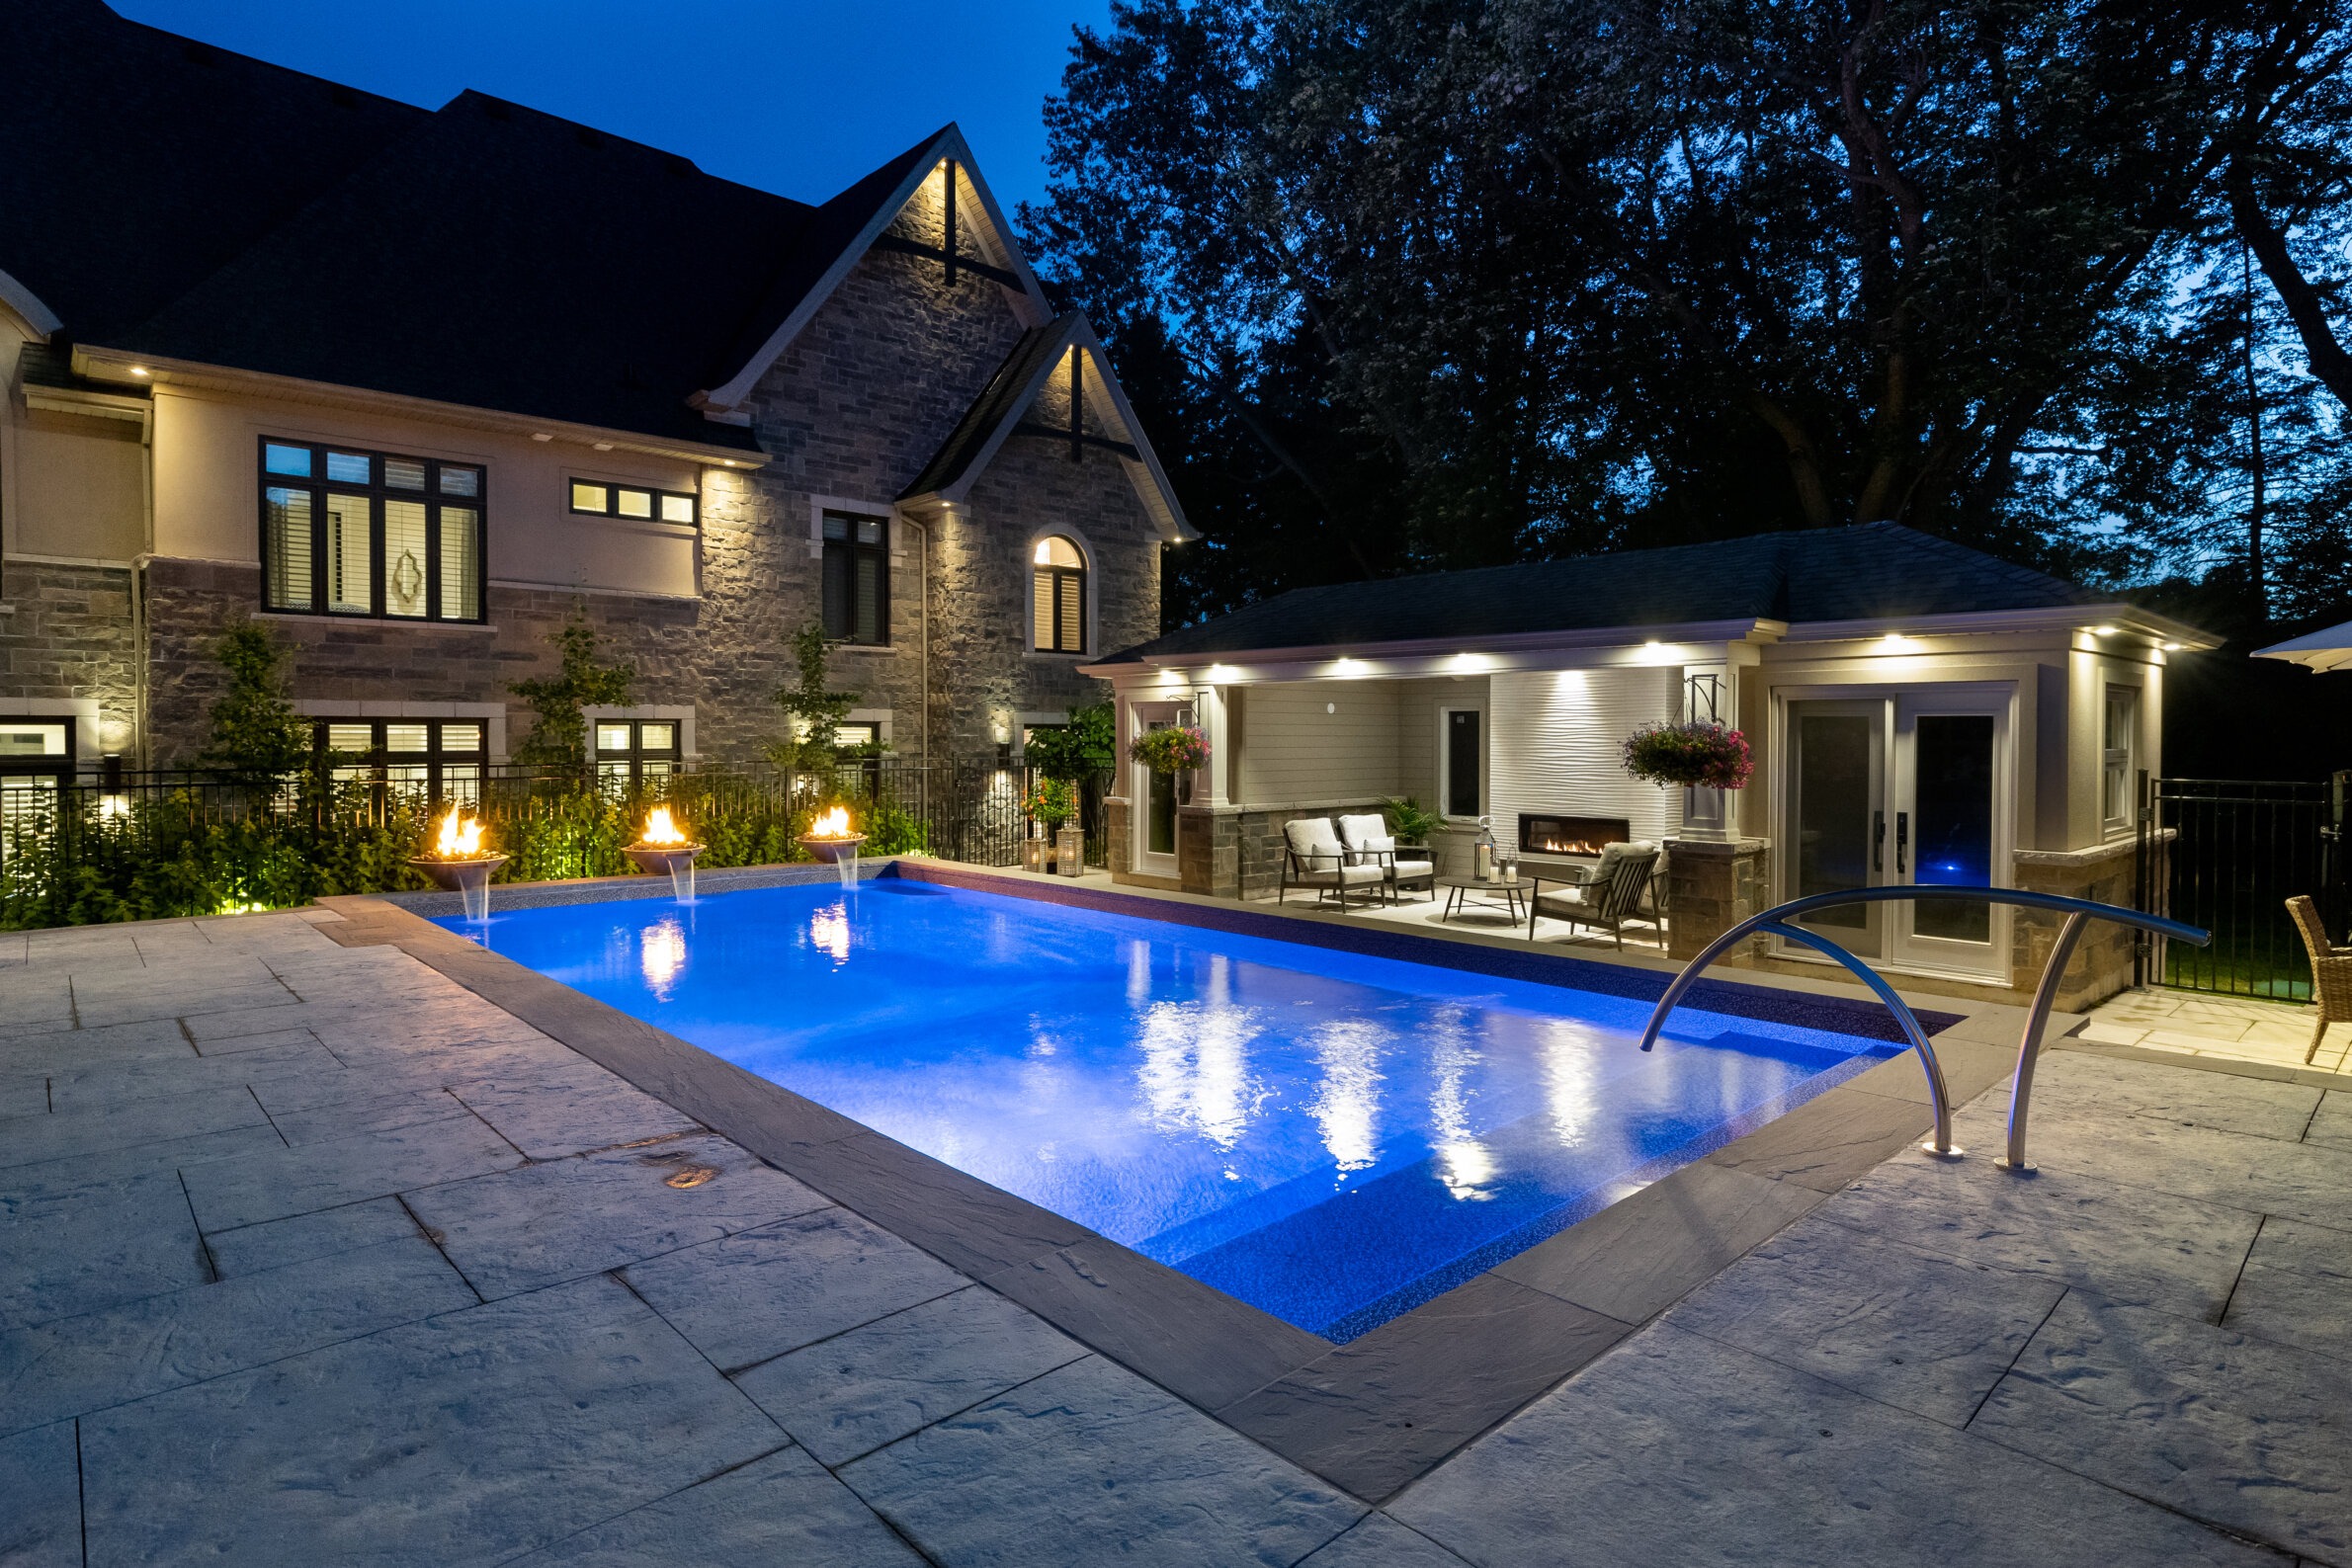 A luxurious backyard at dusk, featuring a lit swimming pool, stone patio, outdoor furniture, and an elegant house with warm interior lighting.